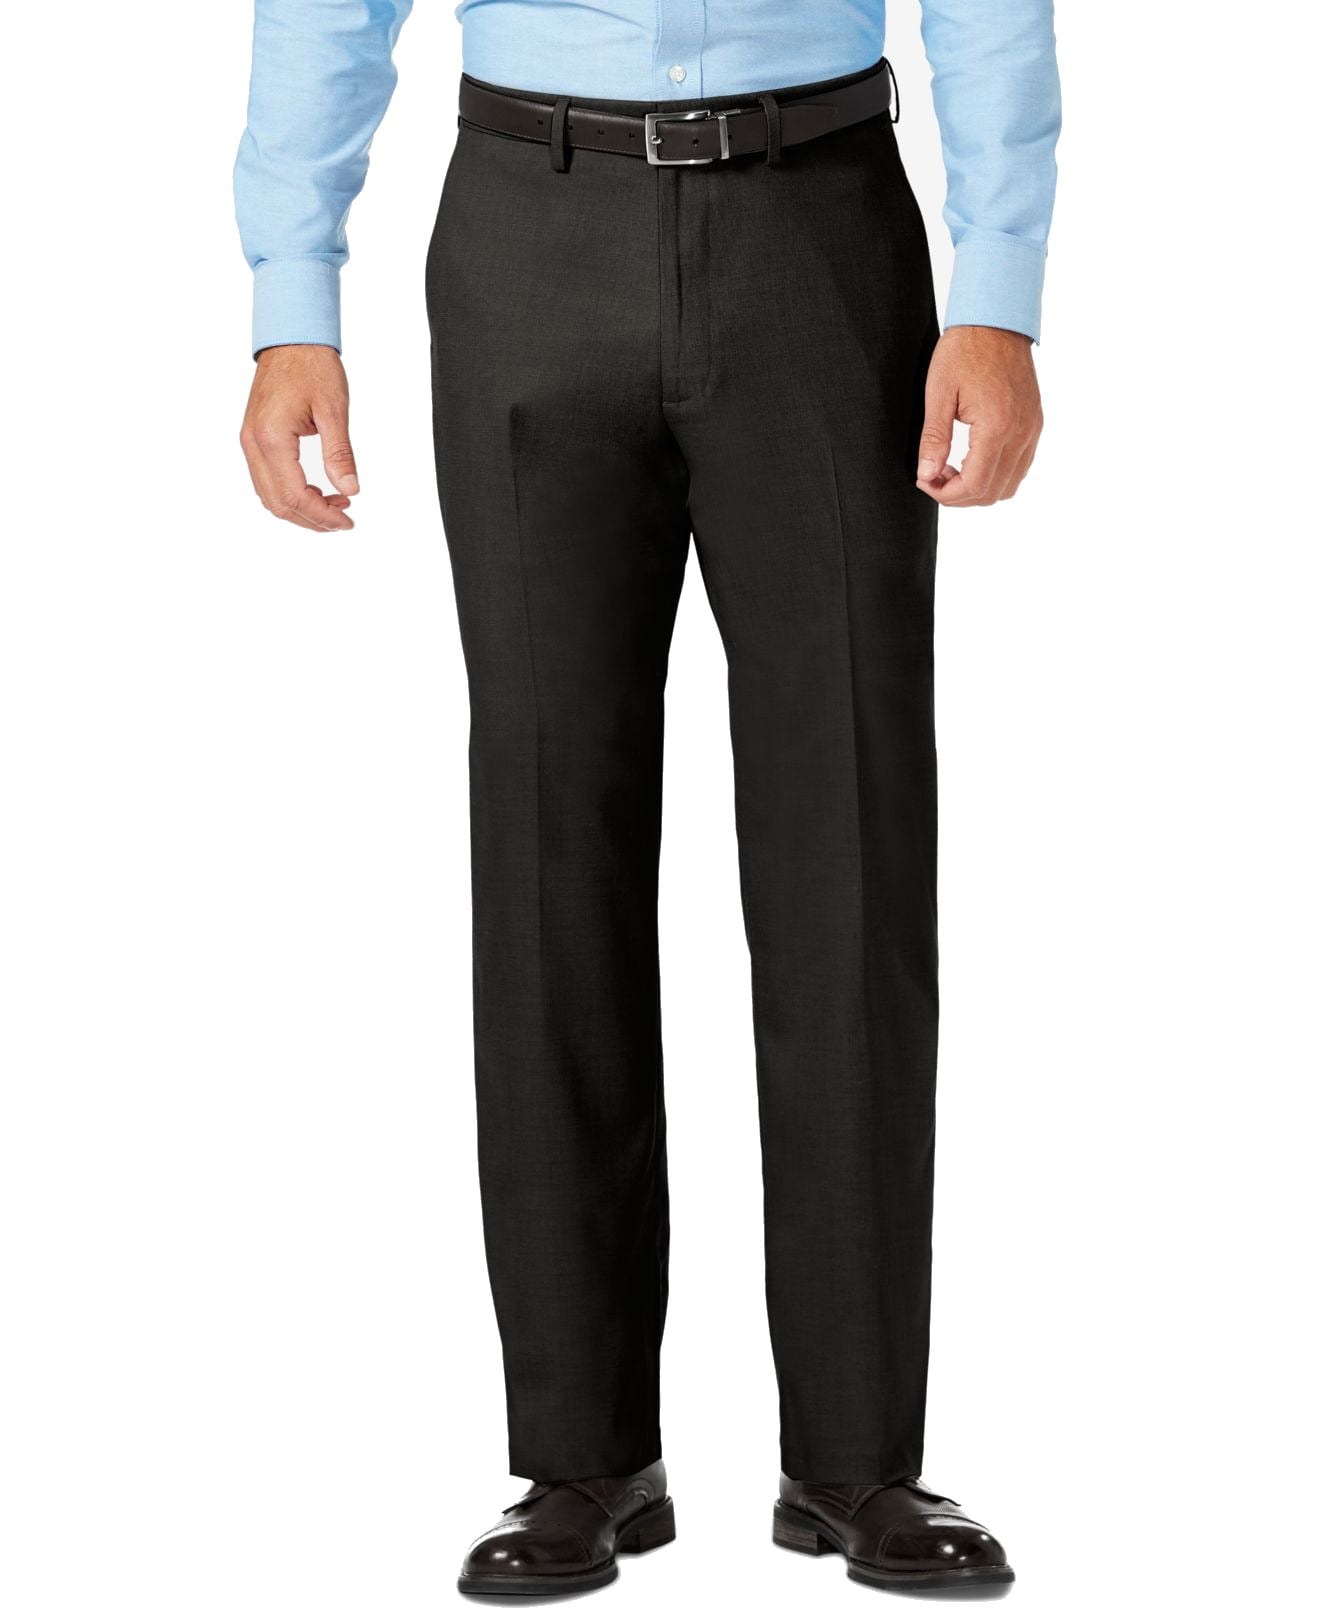 Sweatwater Mens Regular Straight Casual Flat Front Work Office Dress Pants 